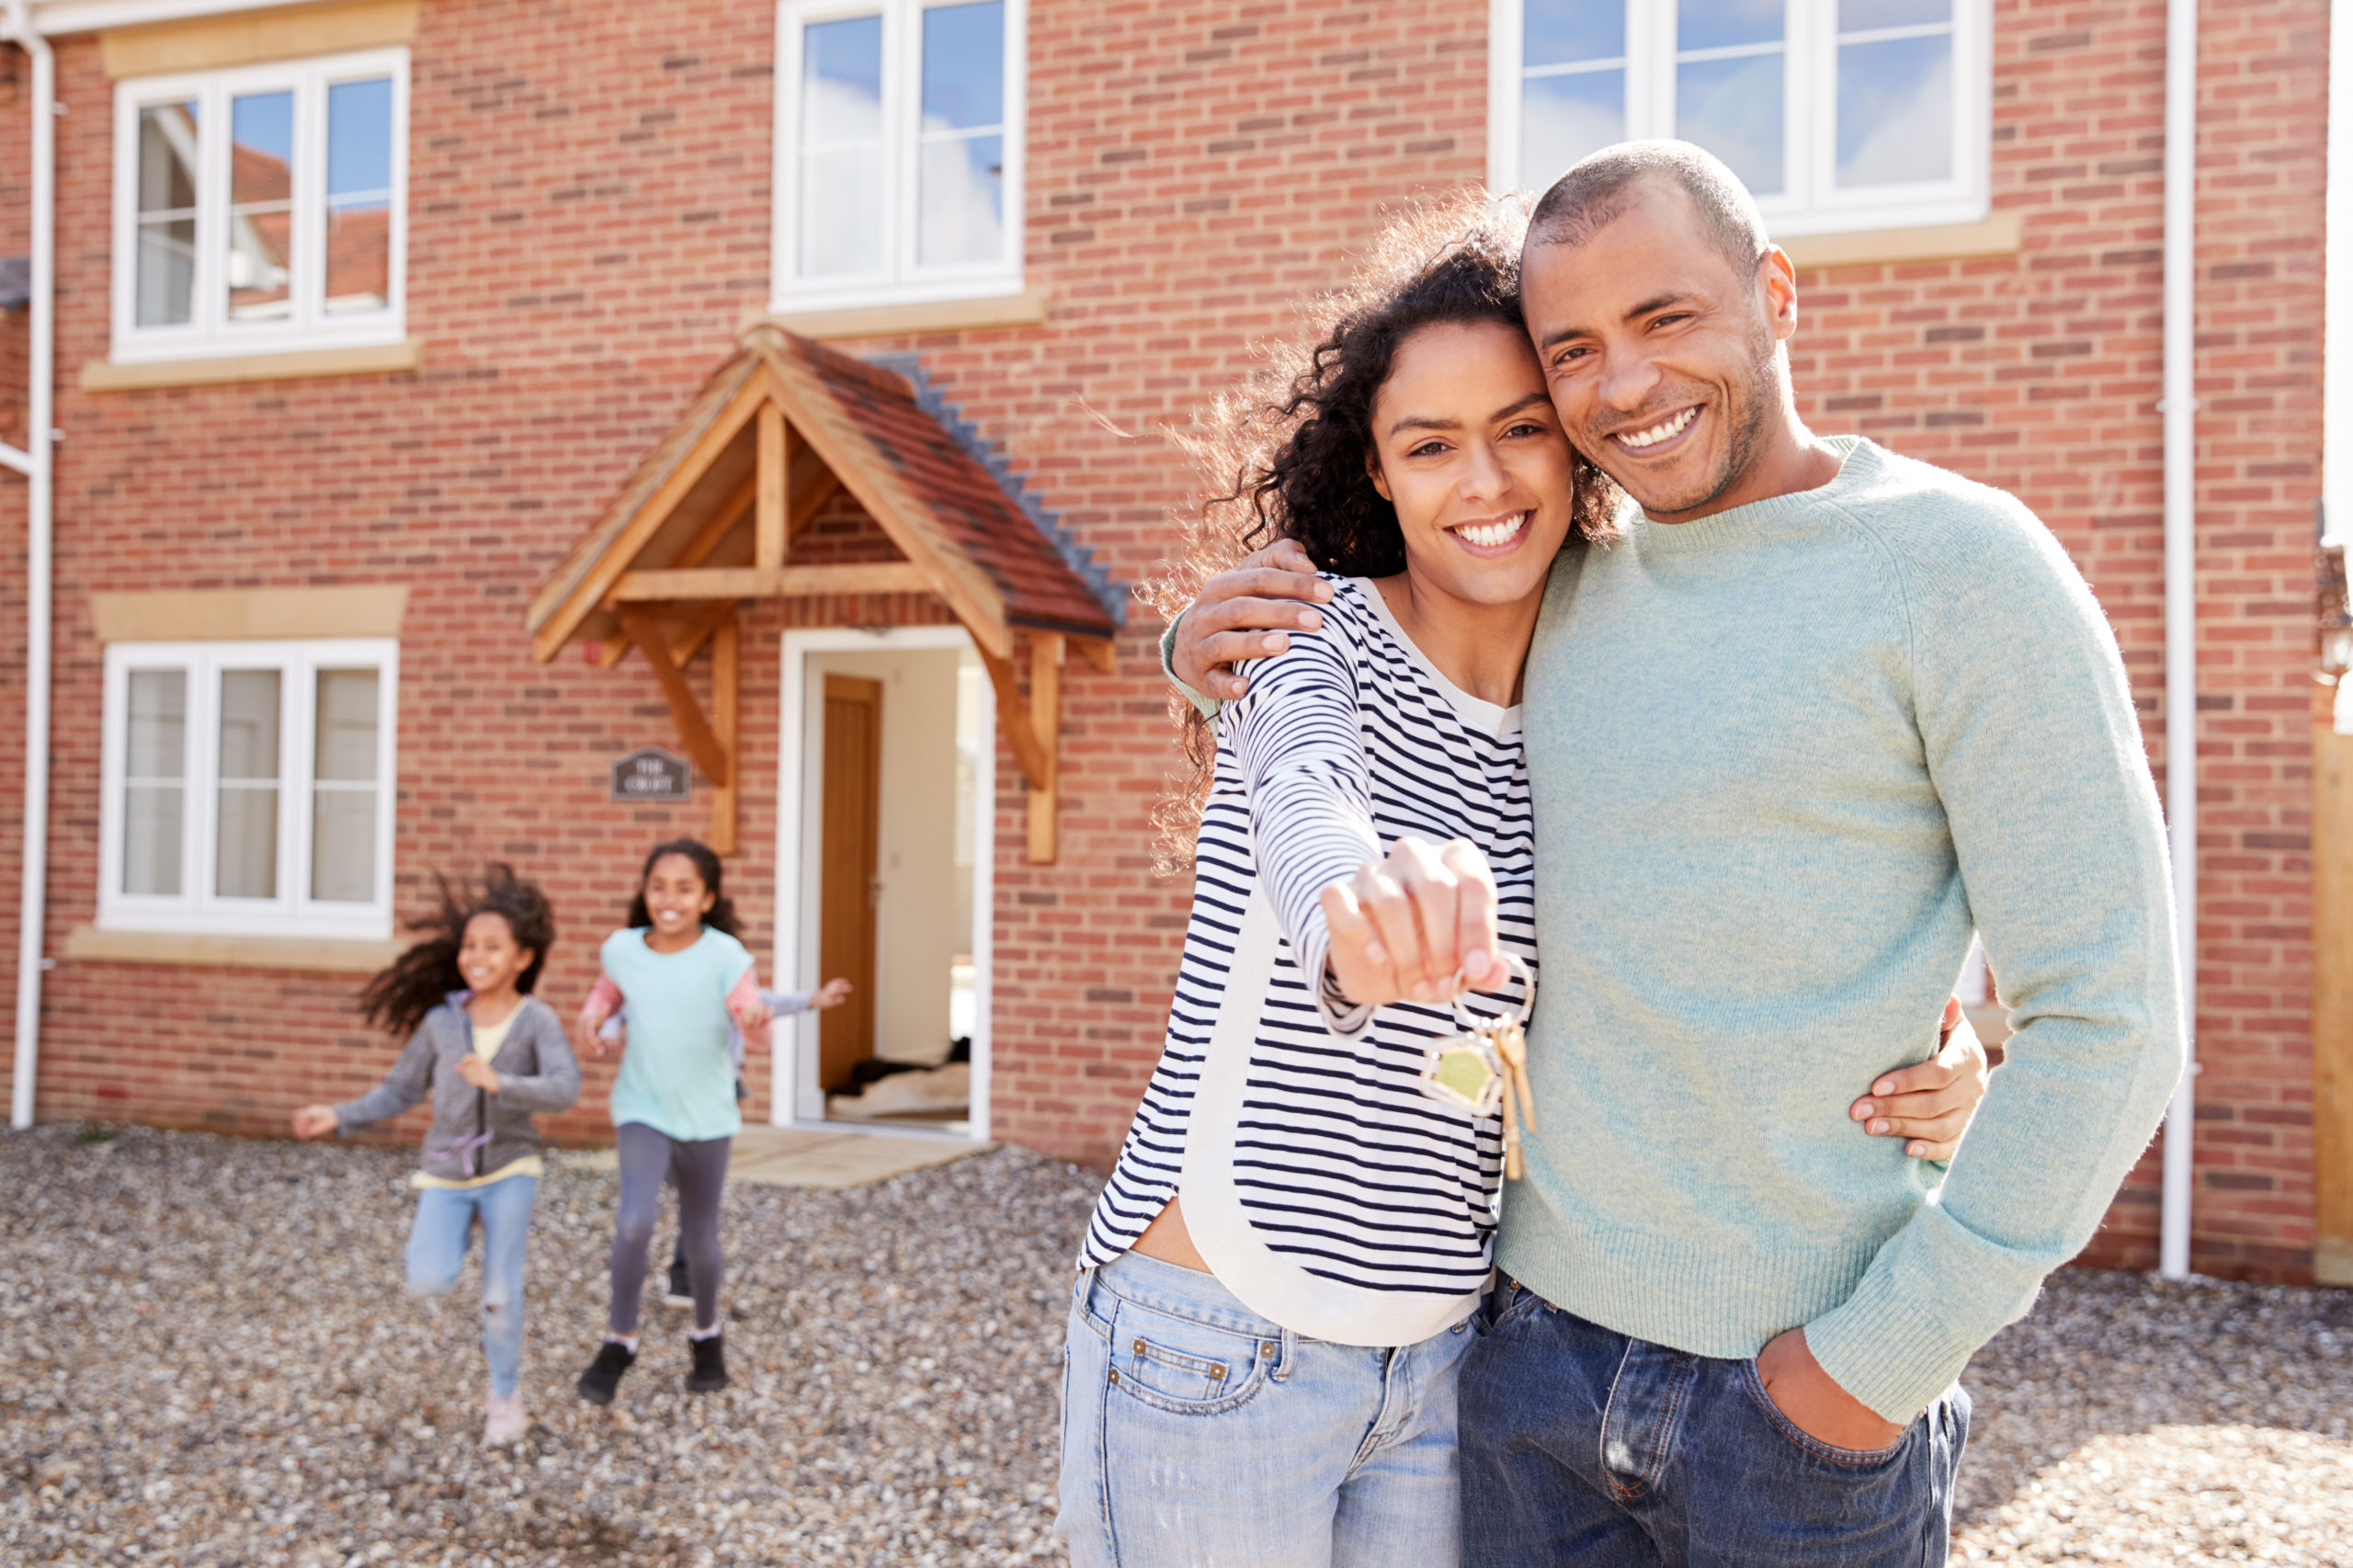 family buying a home